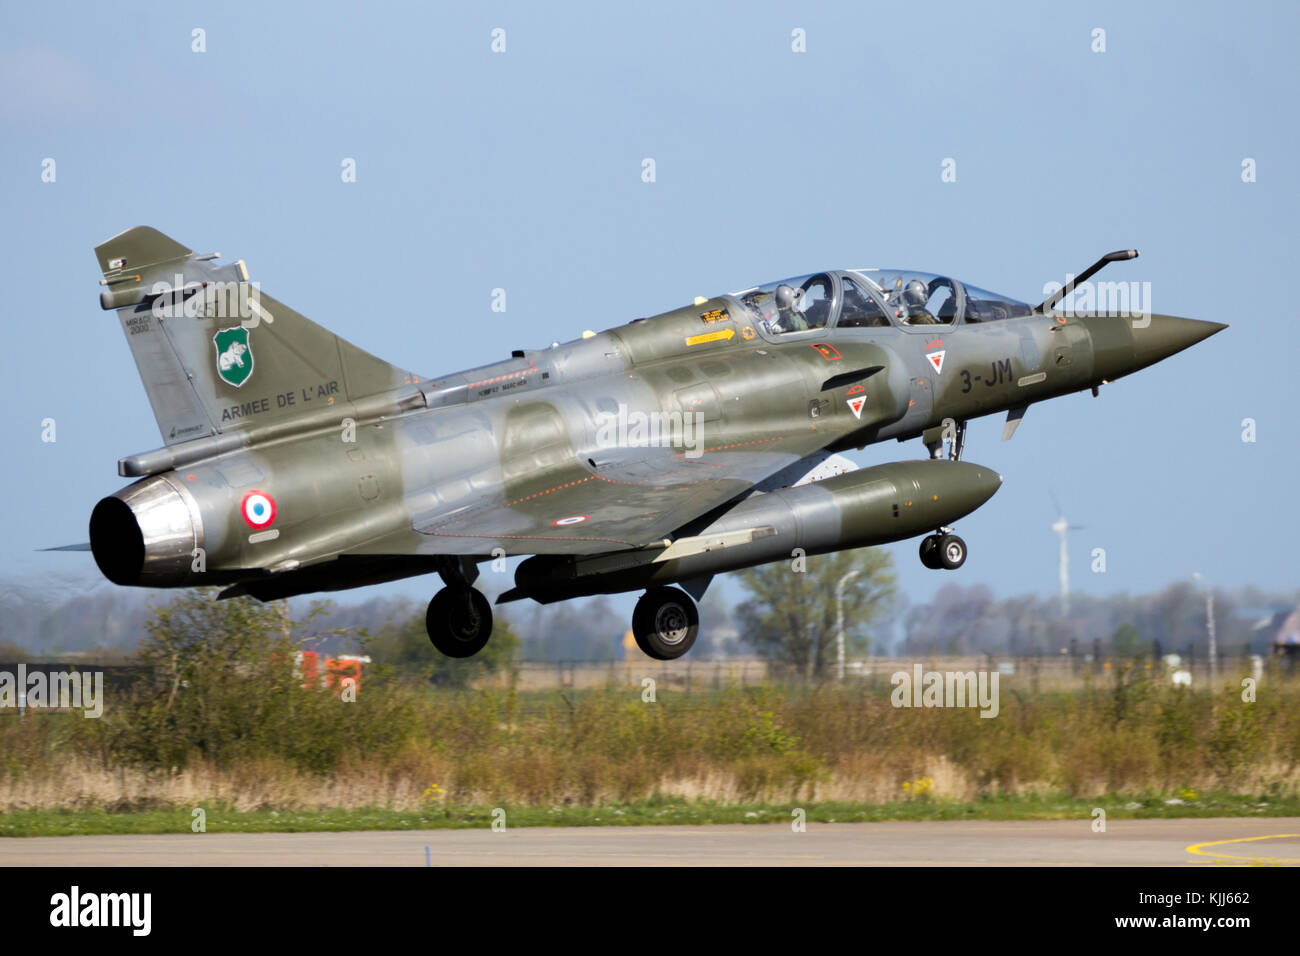 LEEUWARDEN, THE NETHERLANDS - APR 21, 2016: French Air Force Dassault Mirage 2000D jet fighter plane from Escadron de Chasse 2/3 landing on Leeuwarden Stock Photo